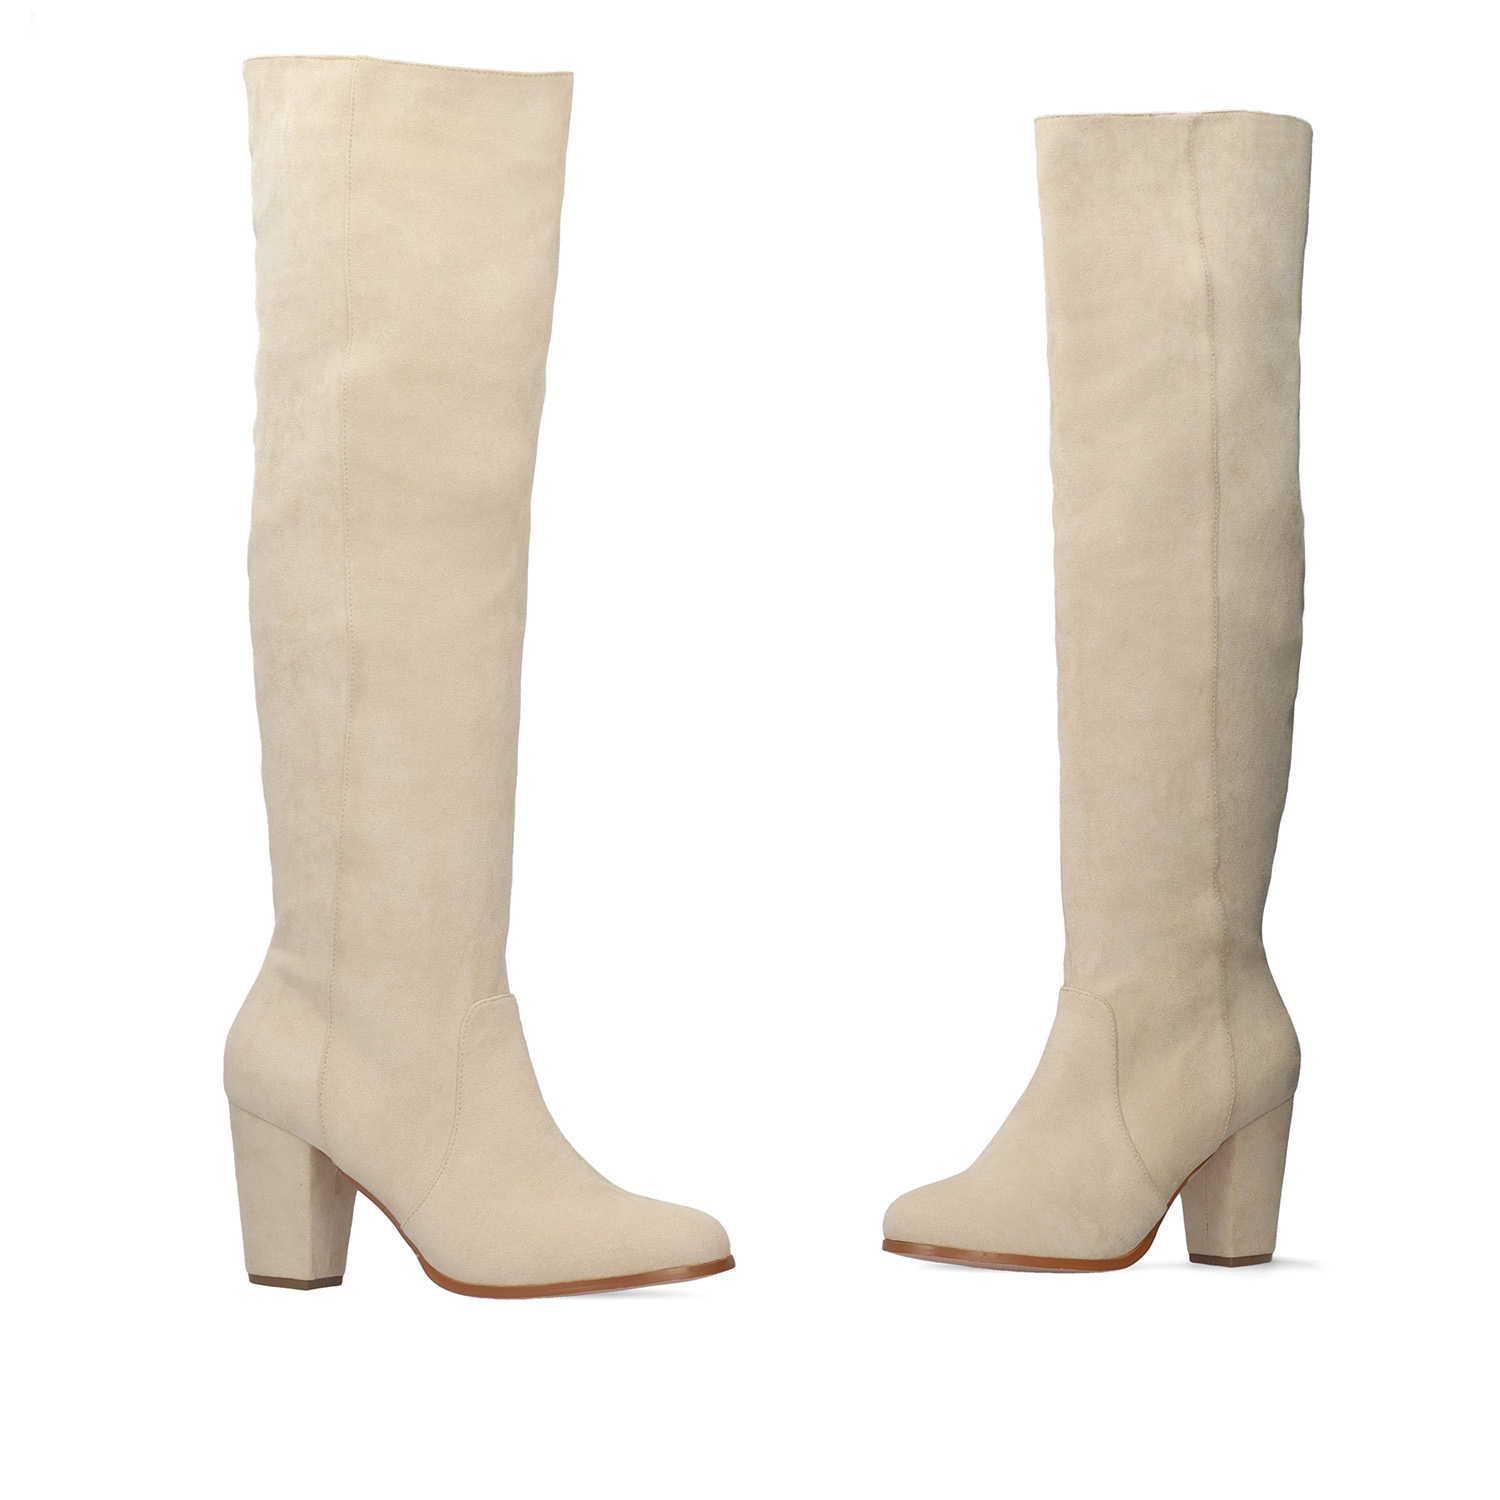 Heeled knee-high boots in off-white faux suede. 